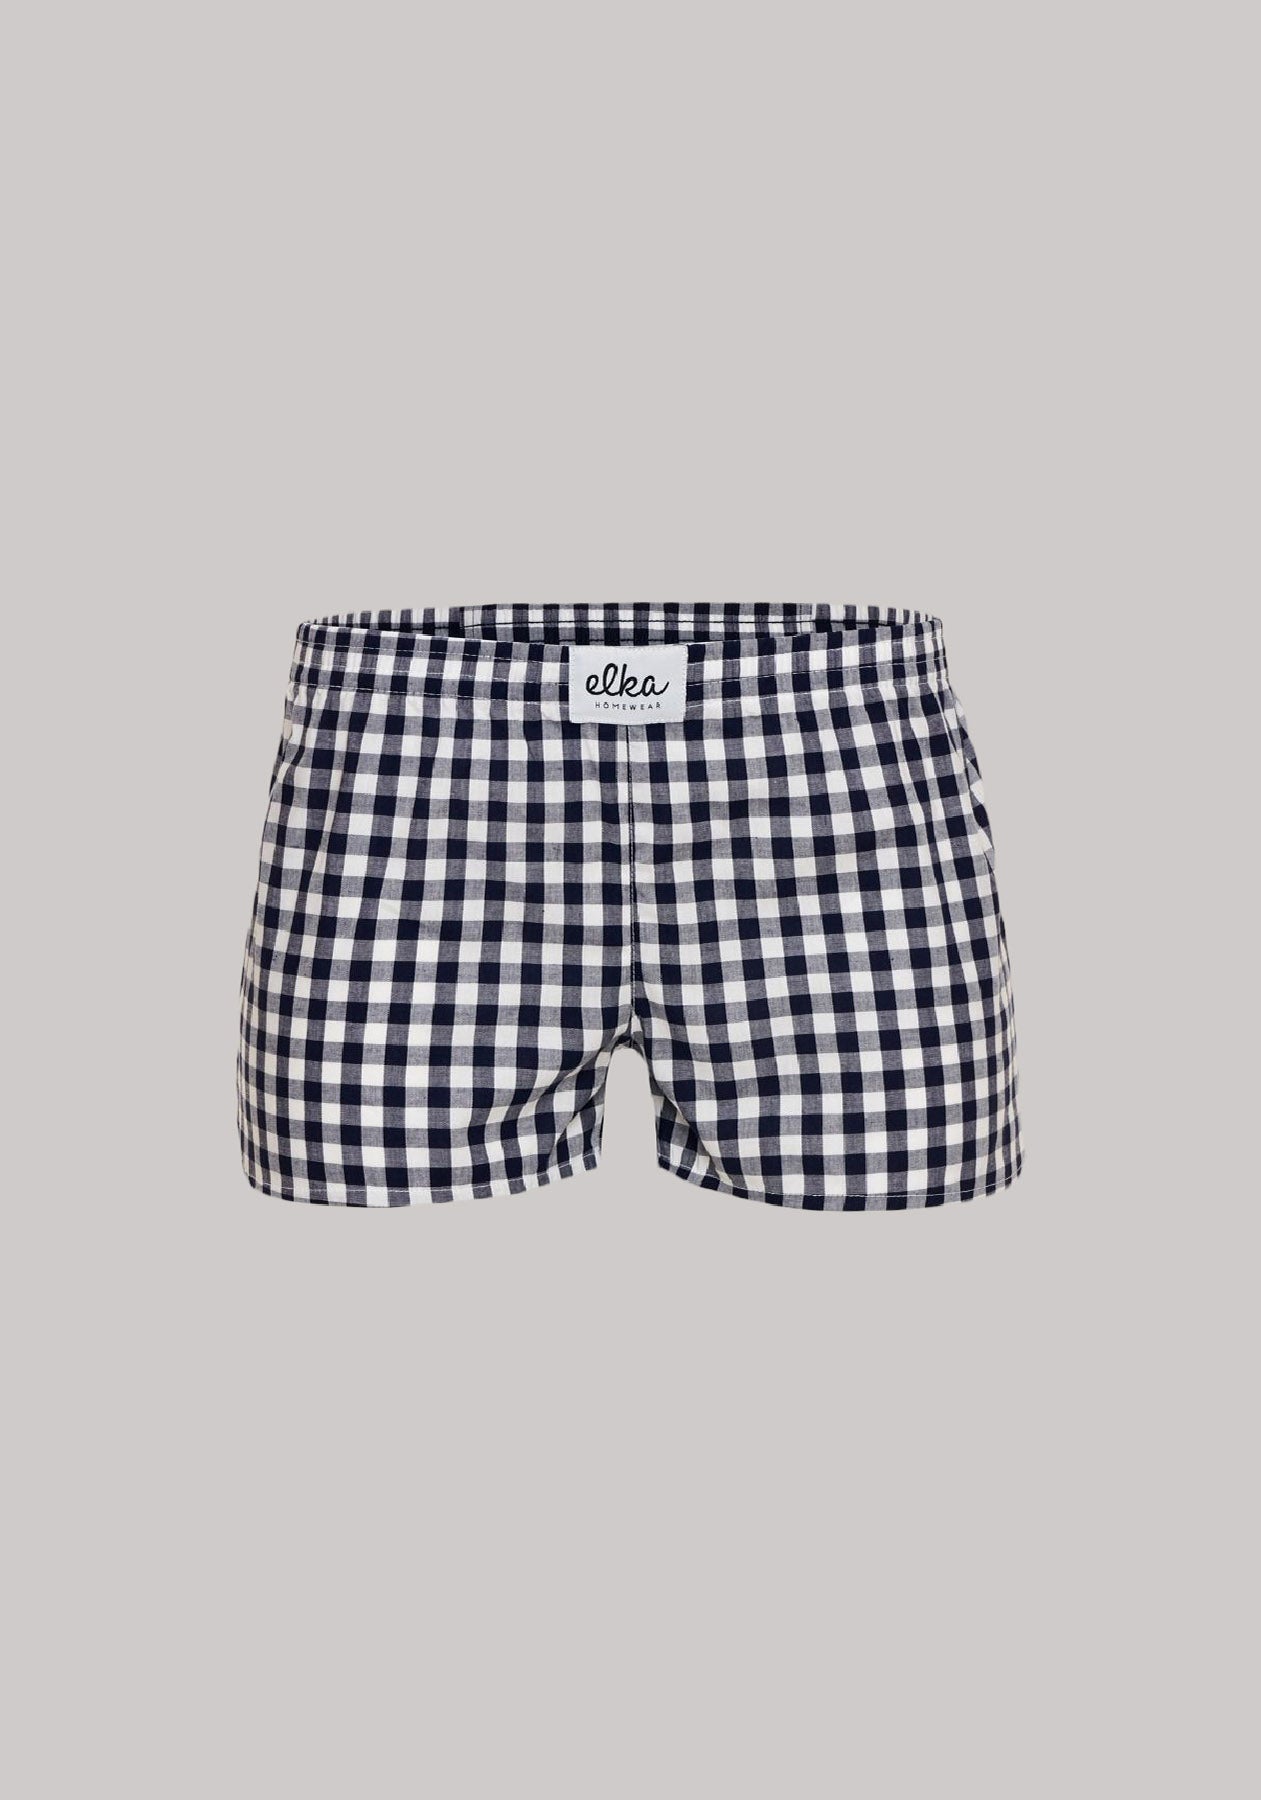 Women's shorts Checked blue